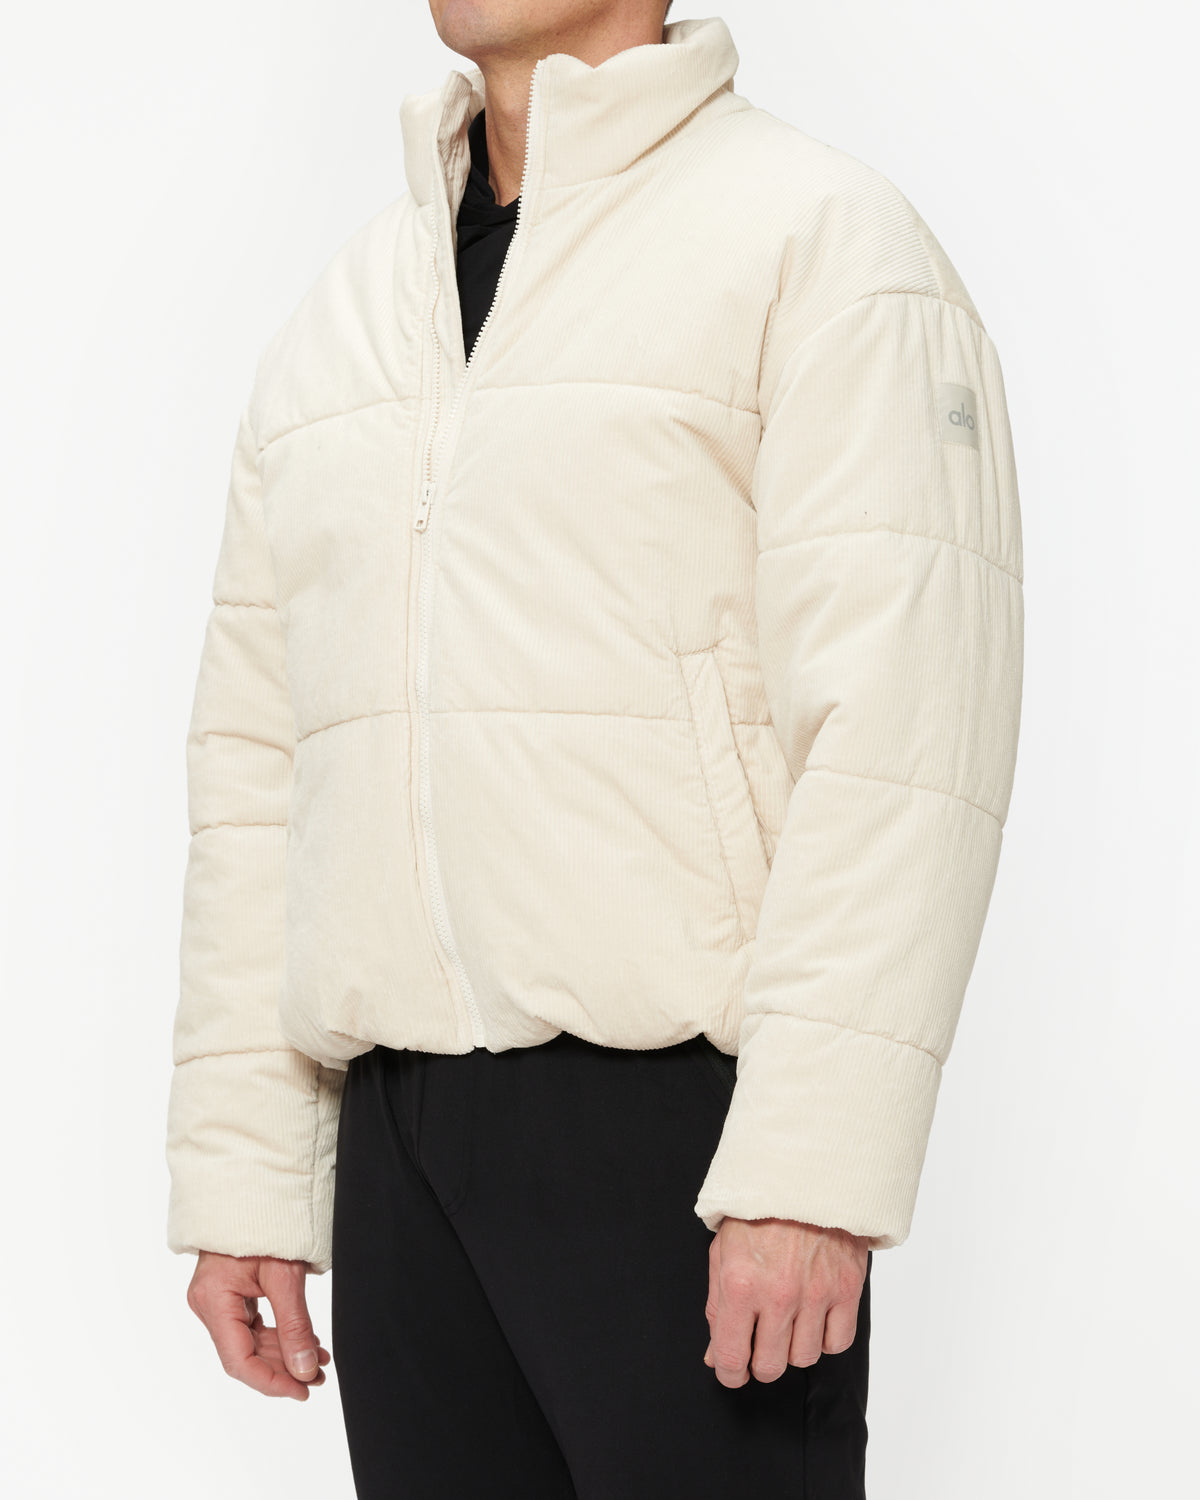 Alo Yoga Corduroy Stage Puffer – The Shop at Equinox